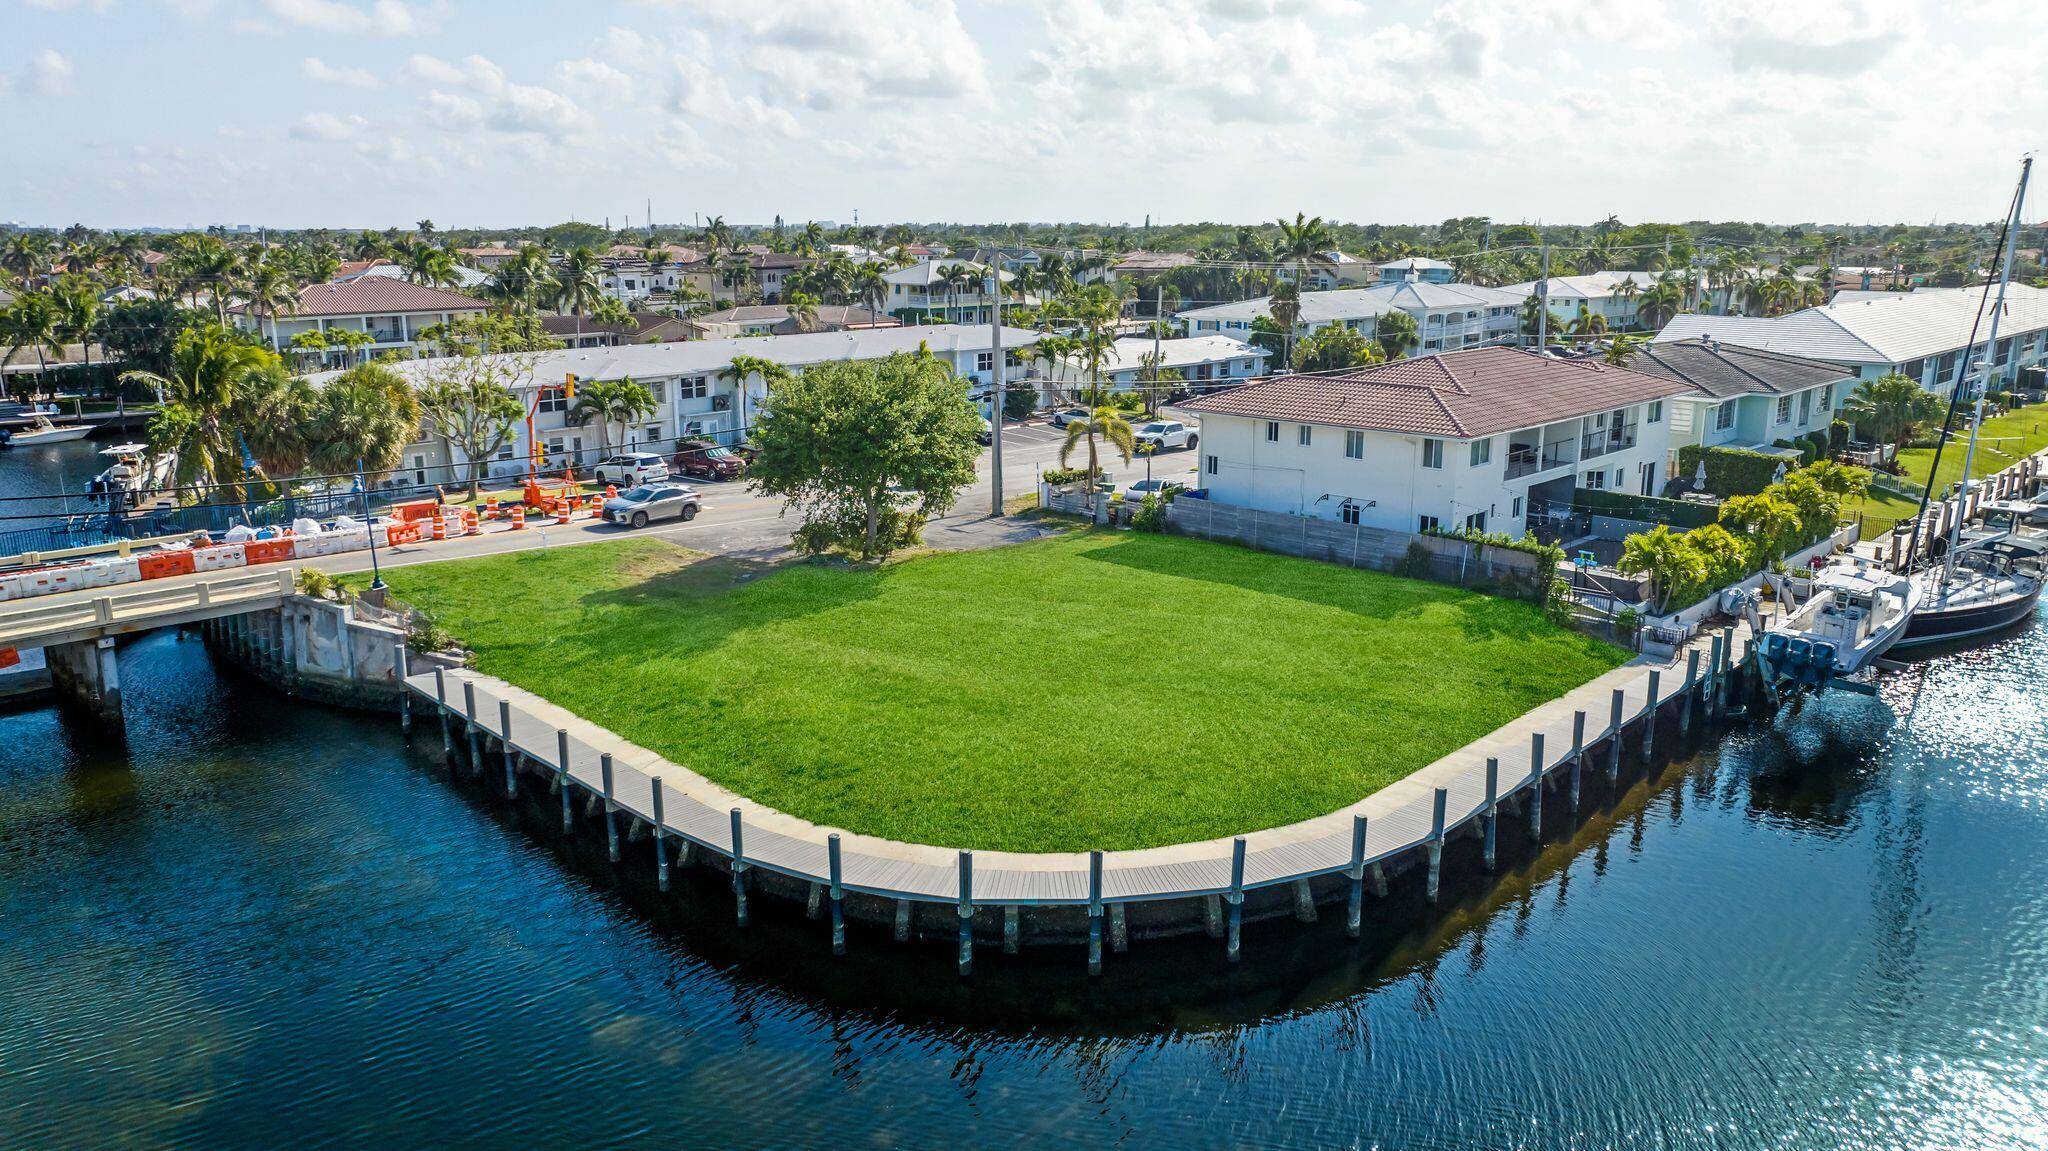 Seize an unparalleled development opportunity in Lighthouse Point with this prime point lot offering 180 degree intracoastal views and easy ocean access.